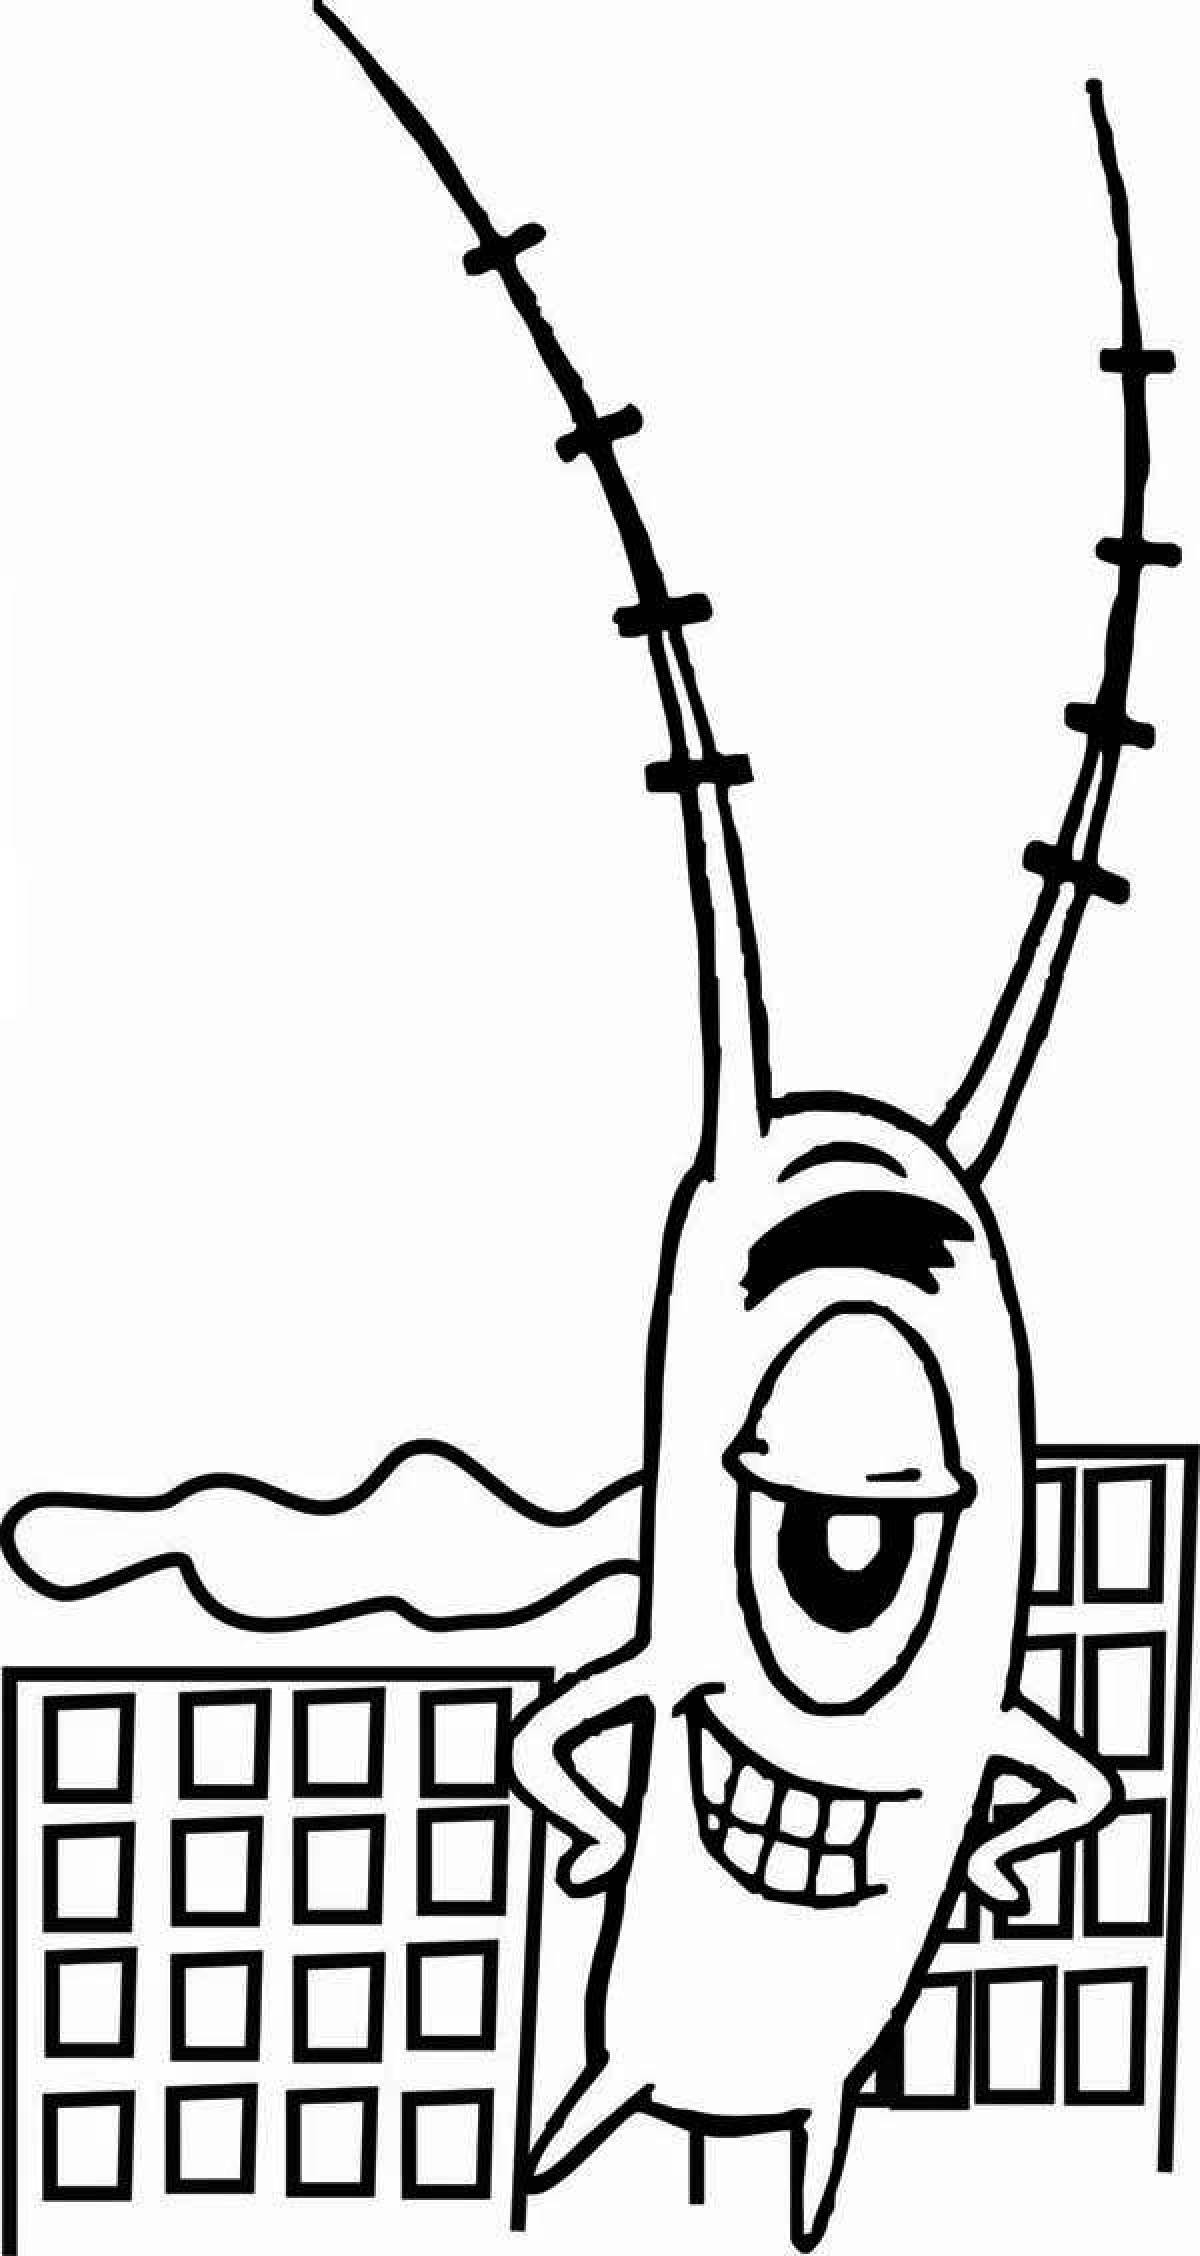 Live plankton coloring page